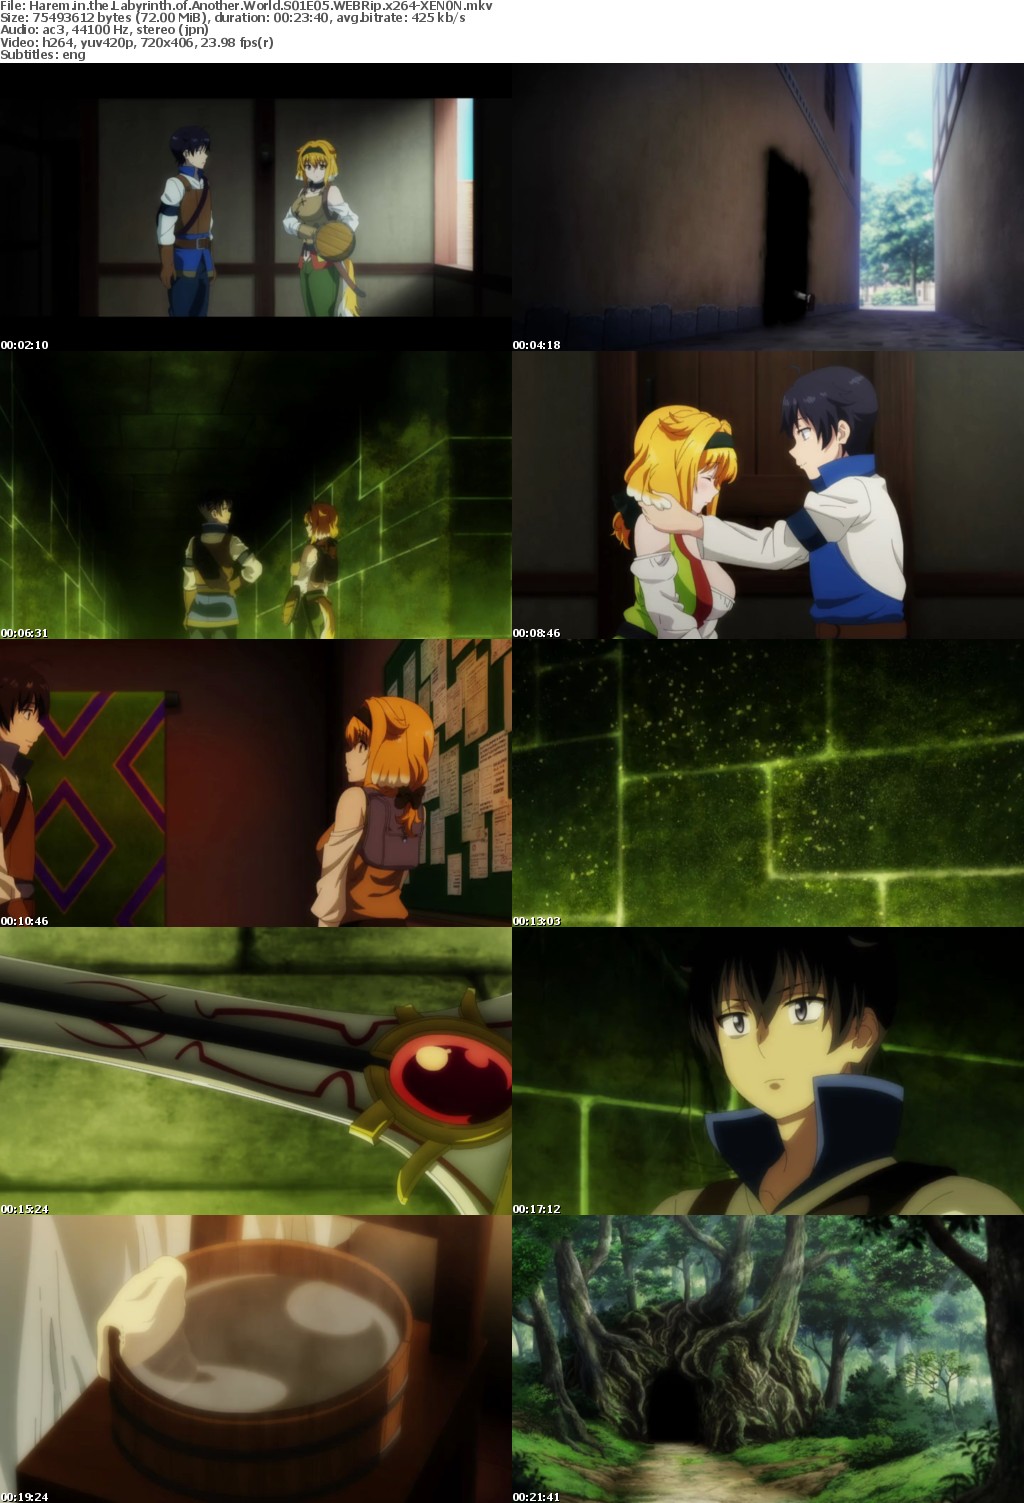 Harem in the Labyrinth of Another World S01E05 WEBRip x264-XEN0N